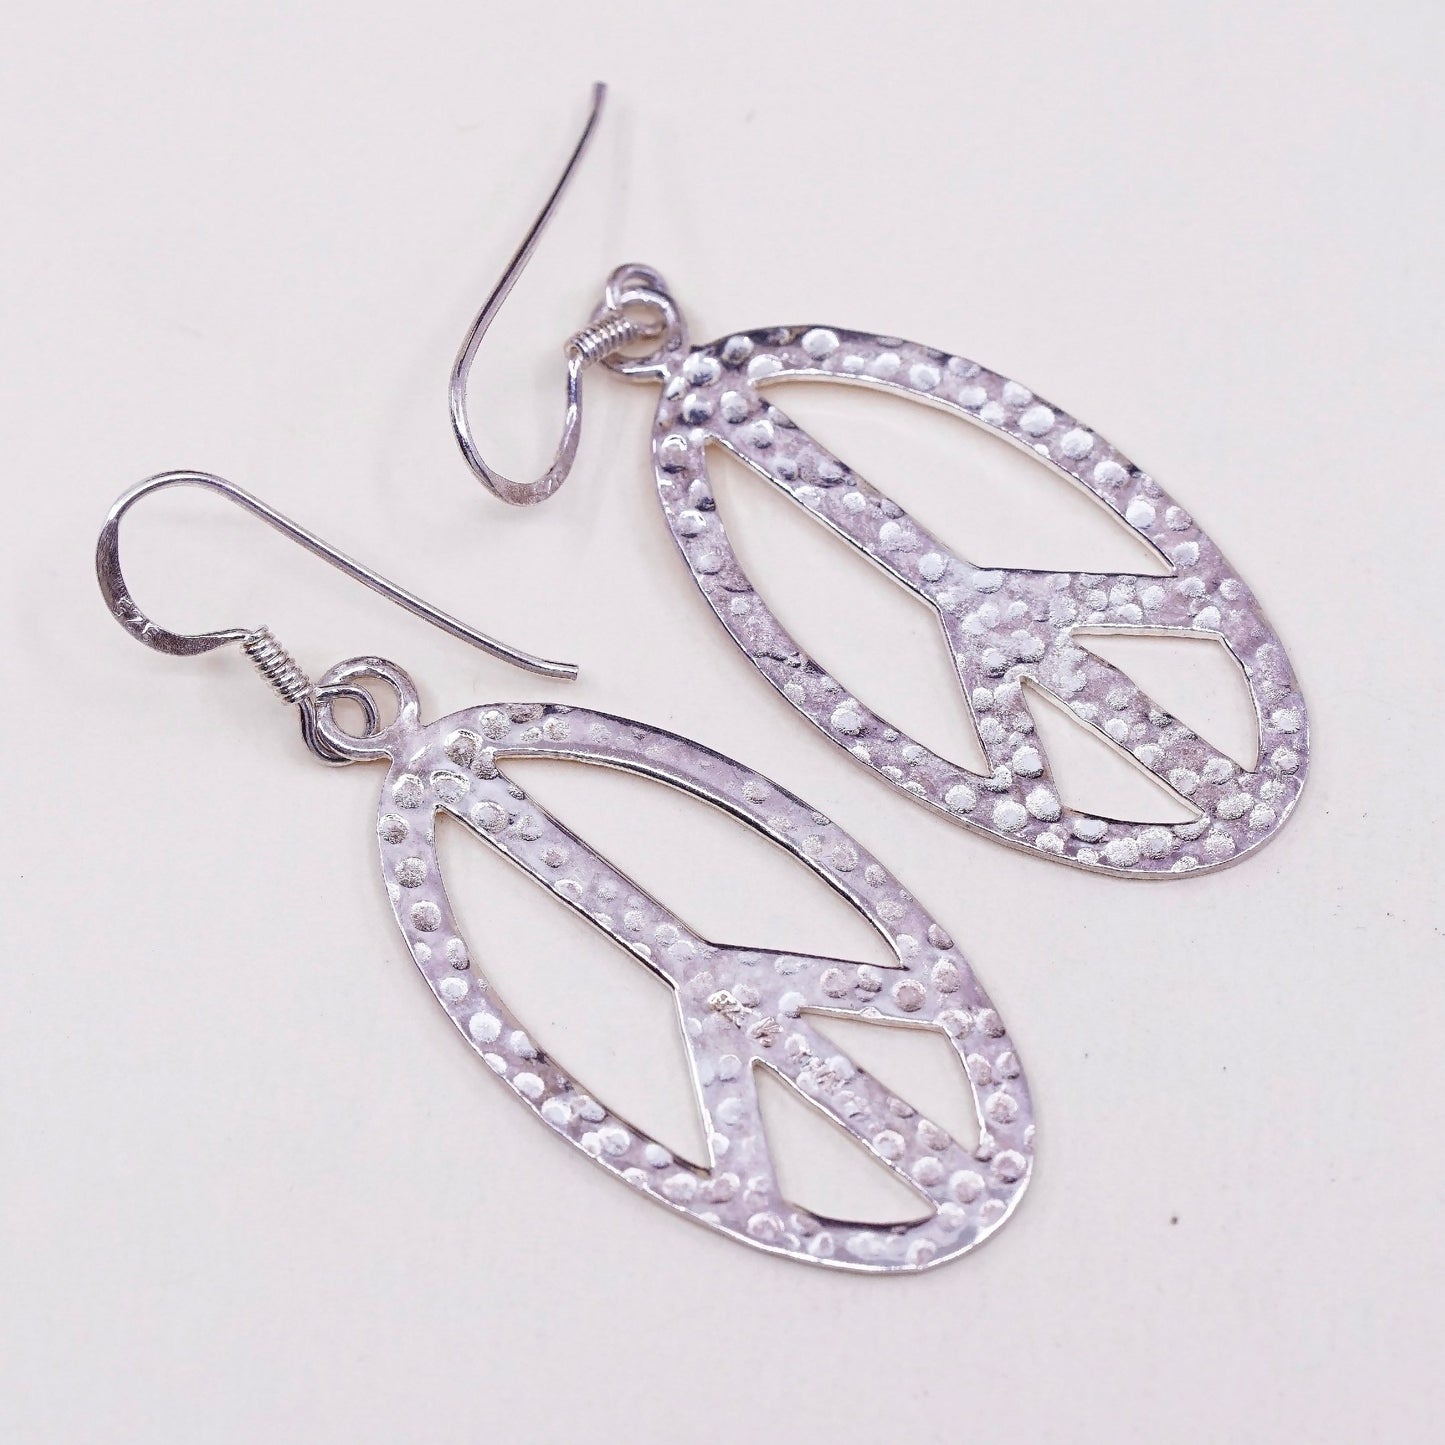 Vintage Sterling 925 Silver Hammered peace CND sign Earrings